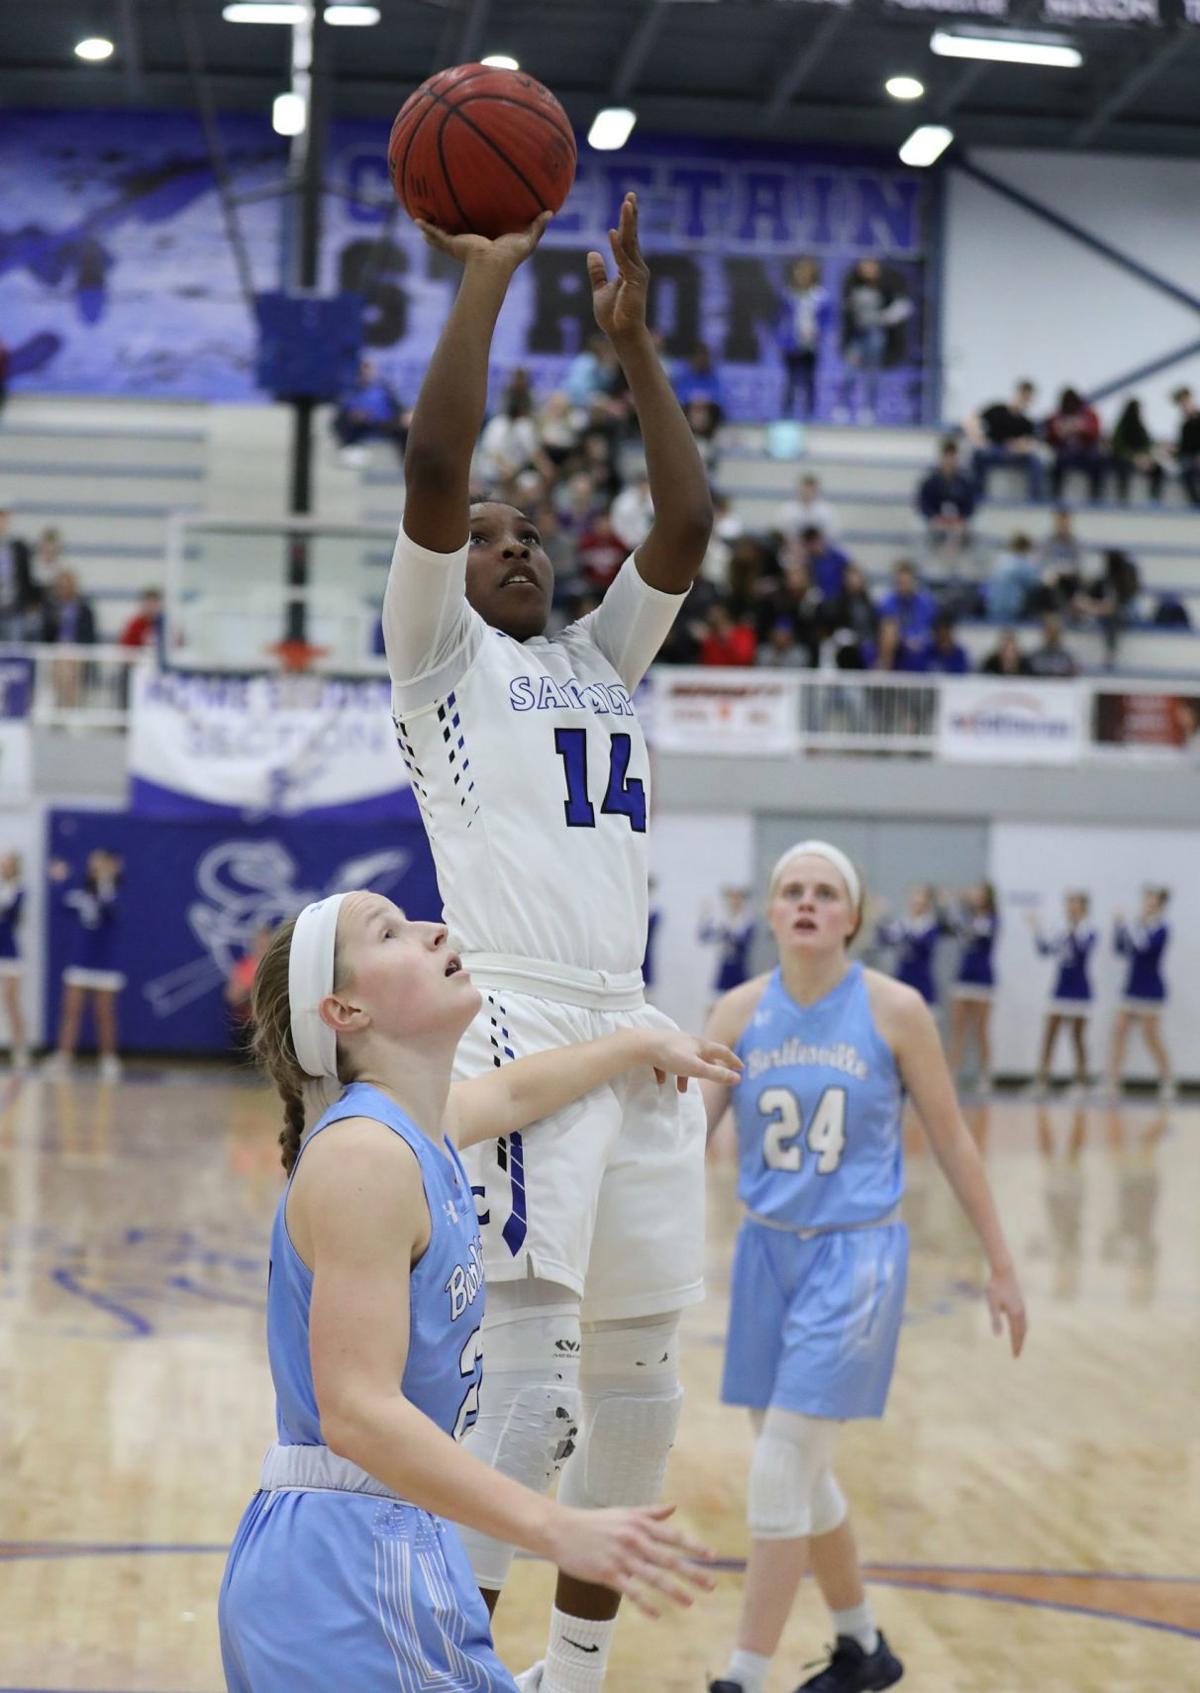 High school basketball: Sapulpa's Taylor Dement and company race past Bartlesville girls on